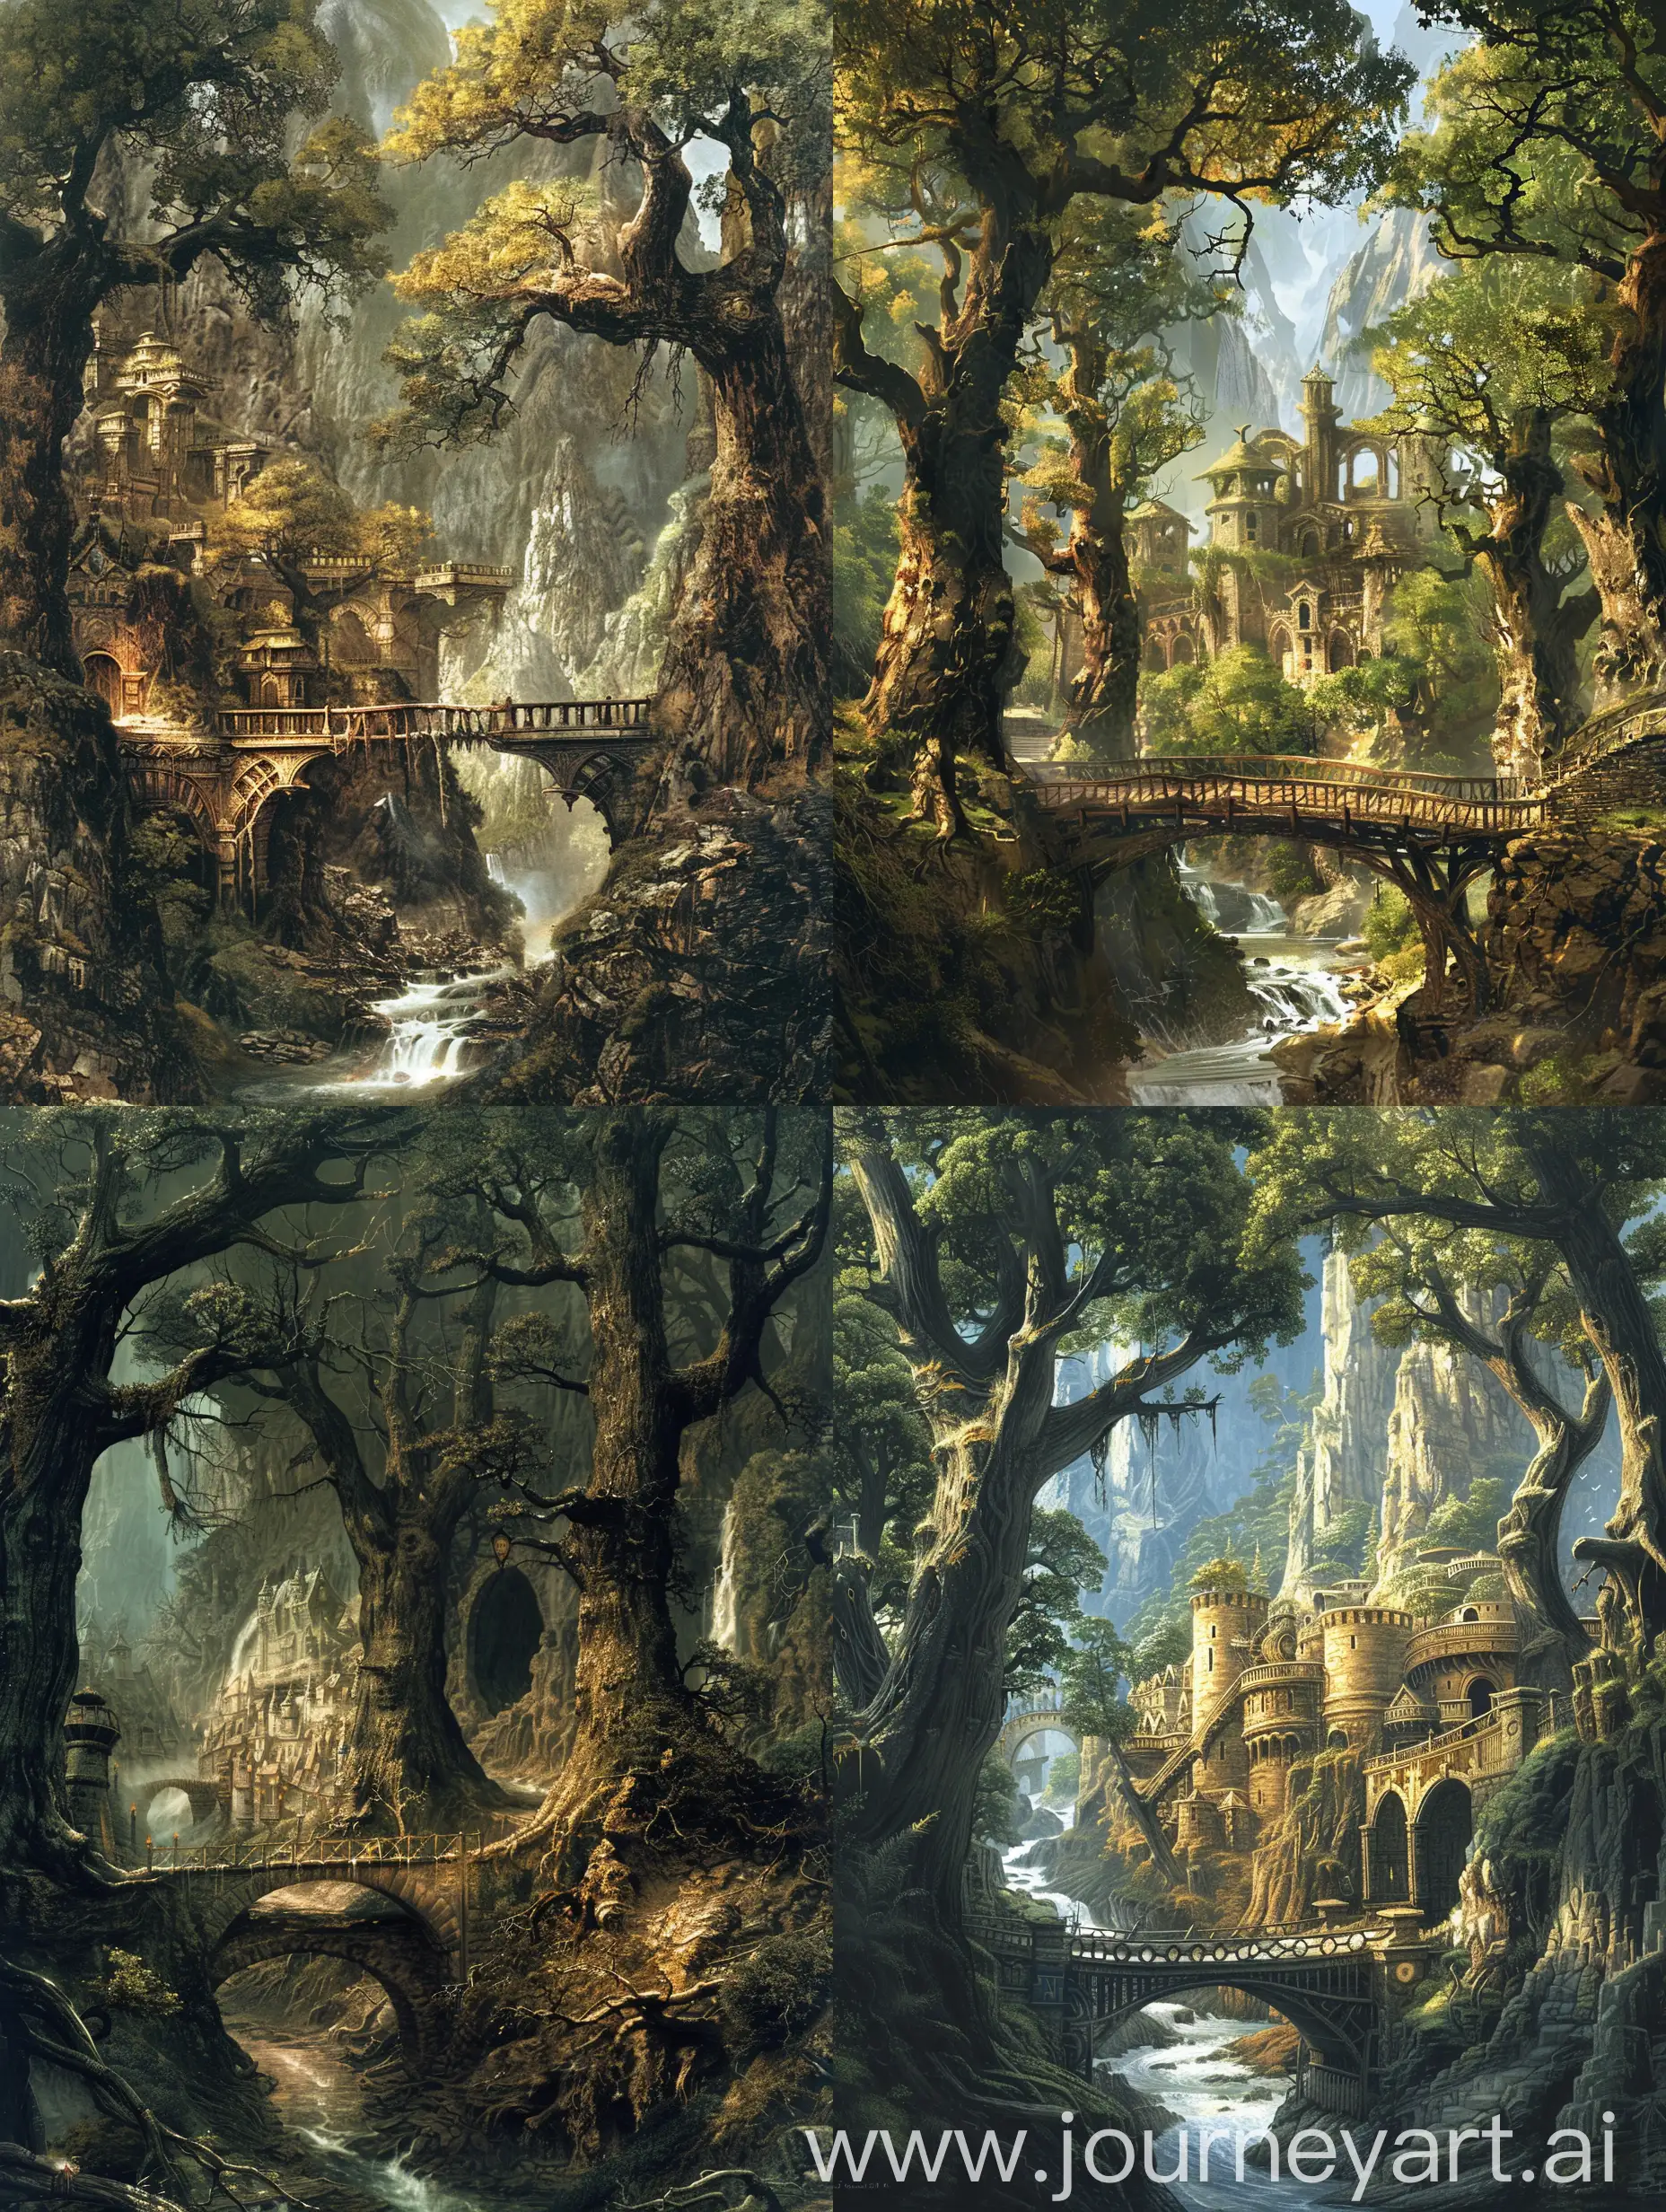 Enchanted-Elves-Forest-Bridge-to-the-Stone-City